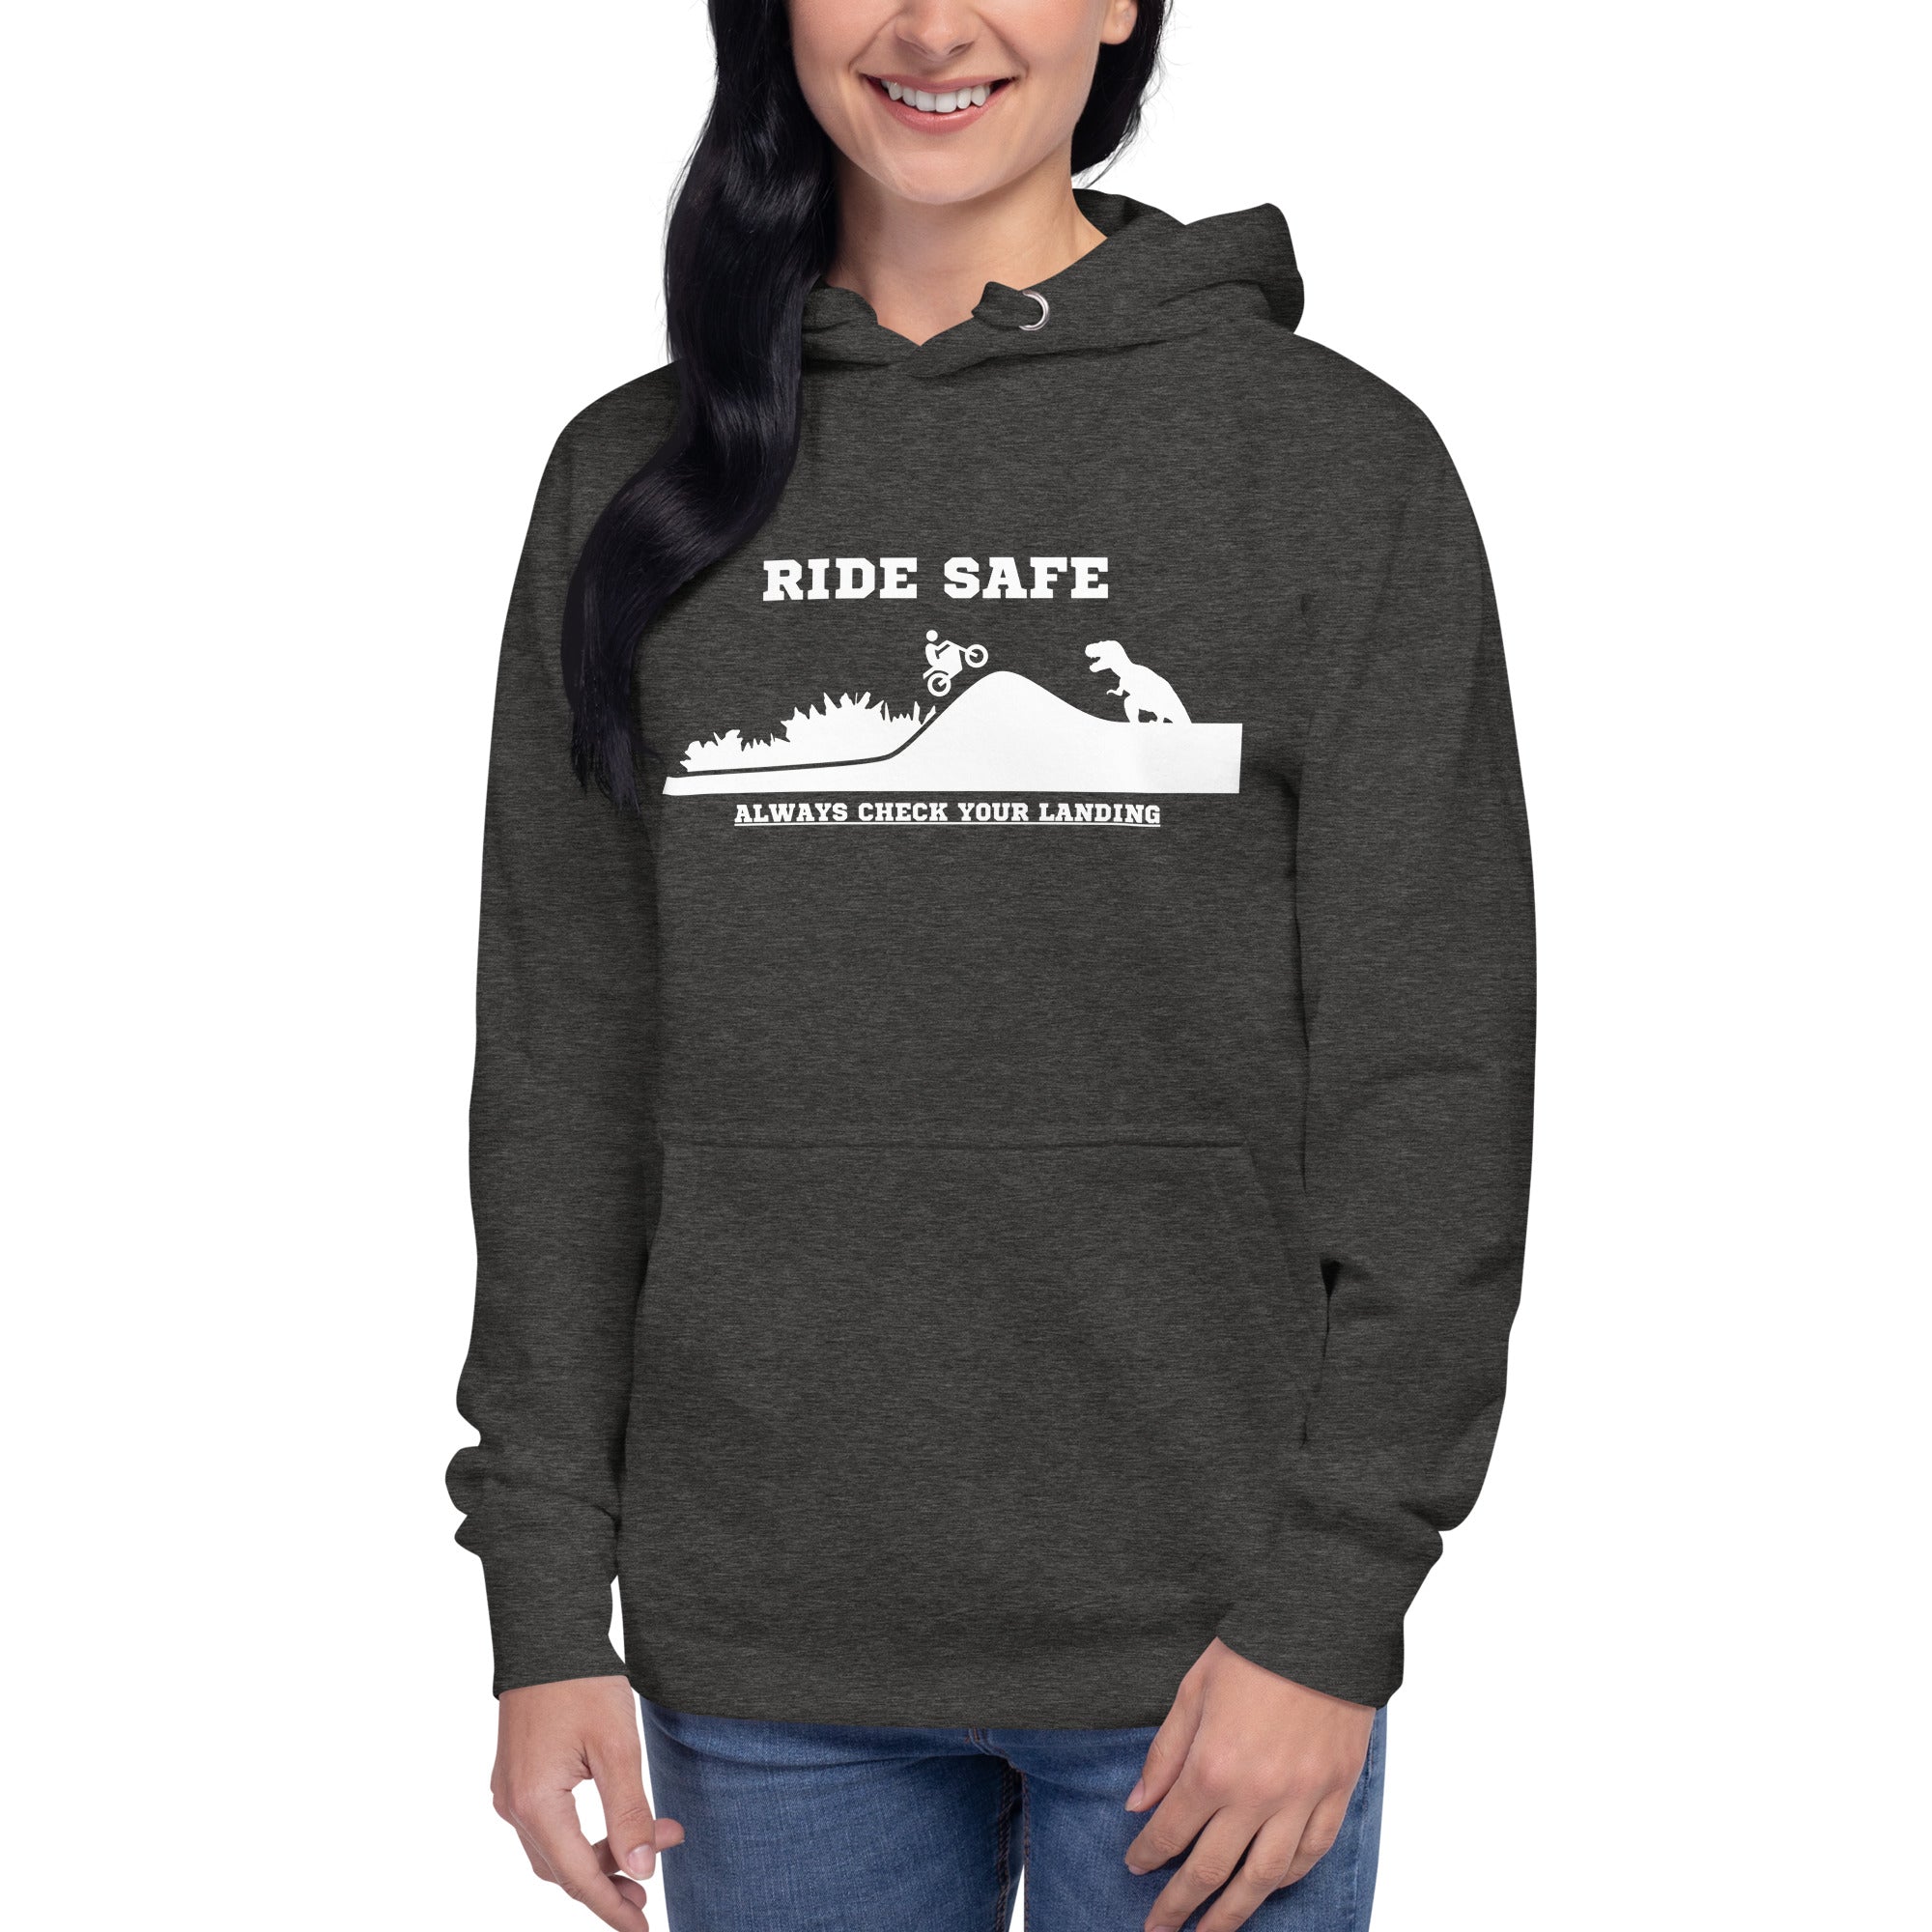 Ride Safe Check Your Landing Women's Heavy Hoodie